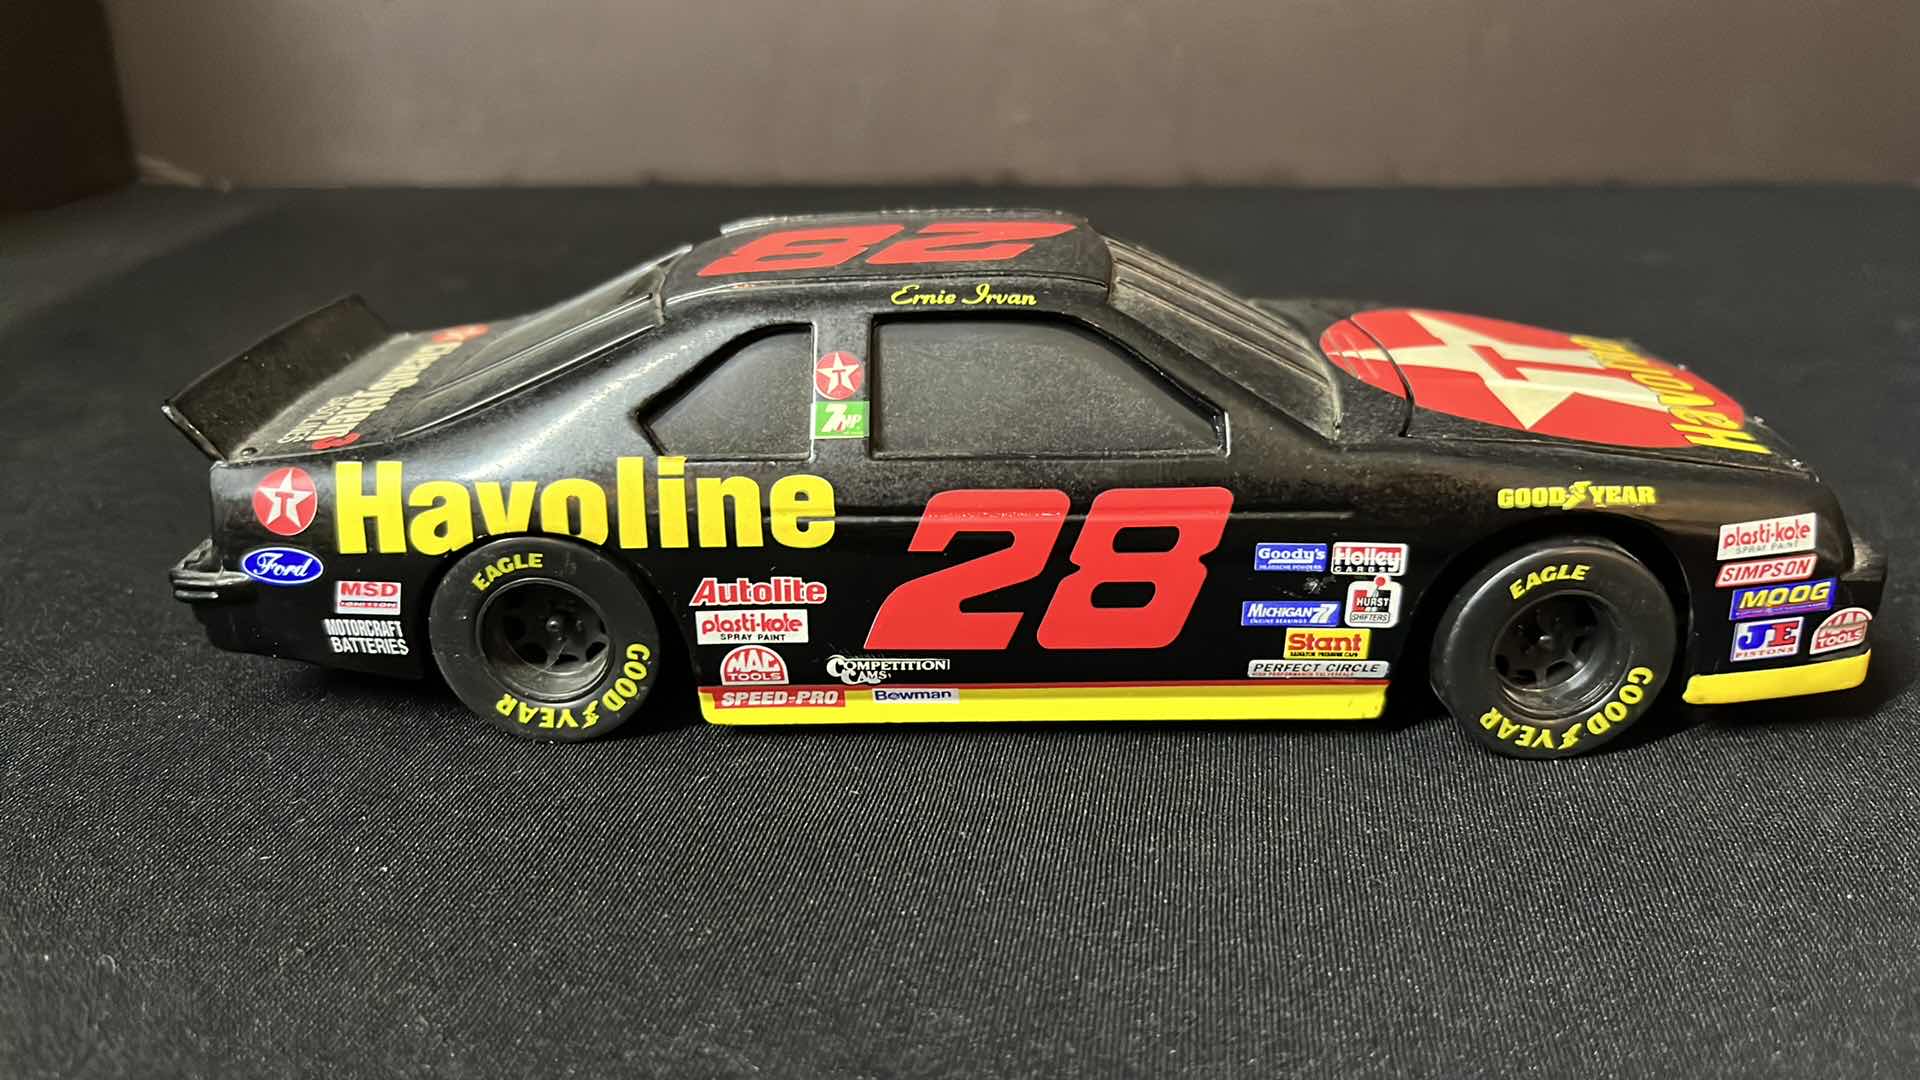 Photo 1 of RACING COLLECTIBLES TEXACO HAVOLINE RACING DIE-CAST BANK W KEY, 1994 FORD THUNDERBIRD COLLECTORS EDITION (STOCK NO 249401121-2)